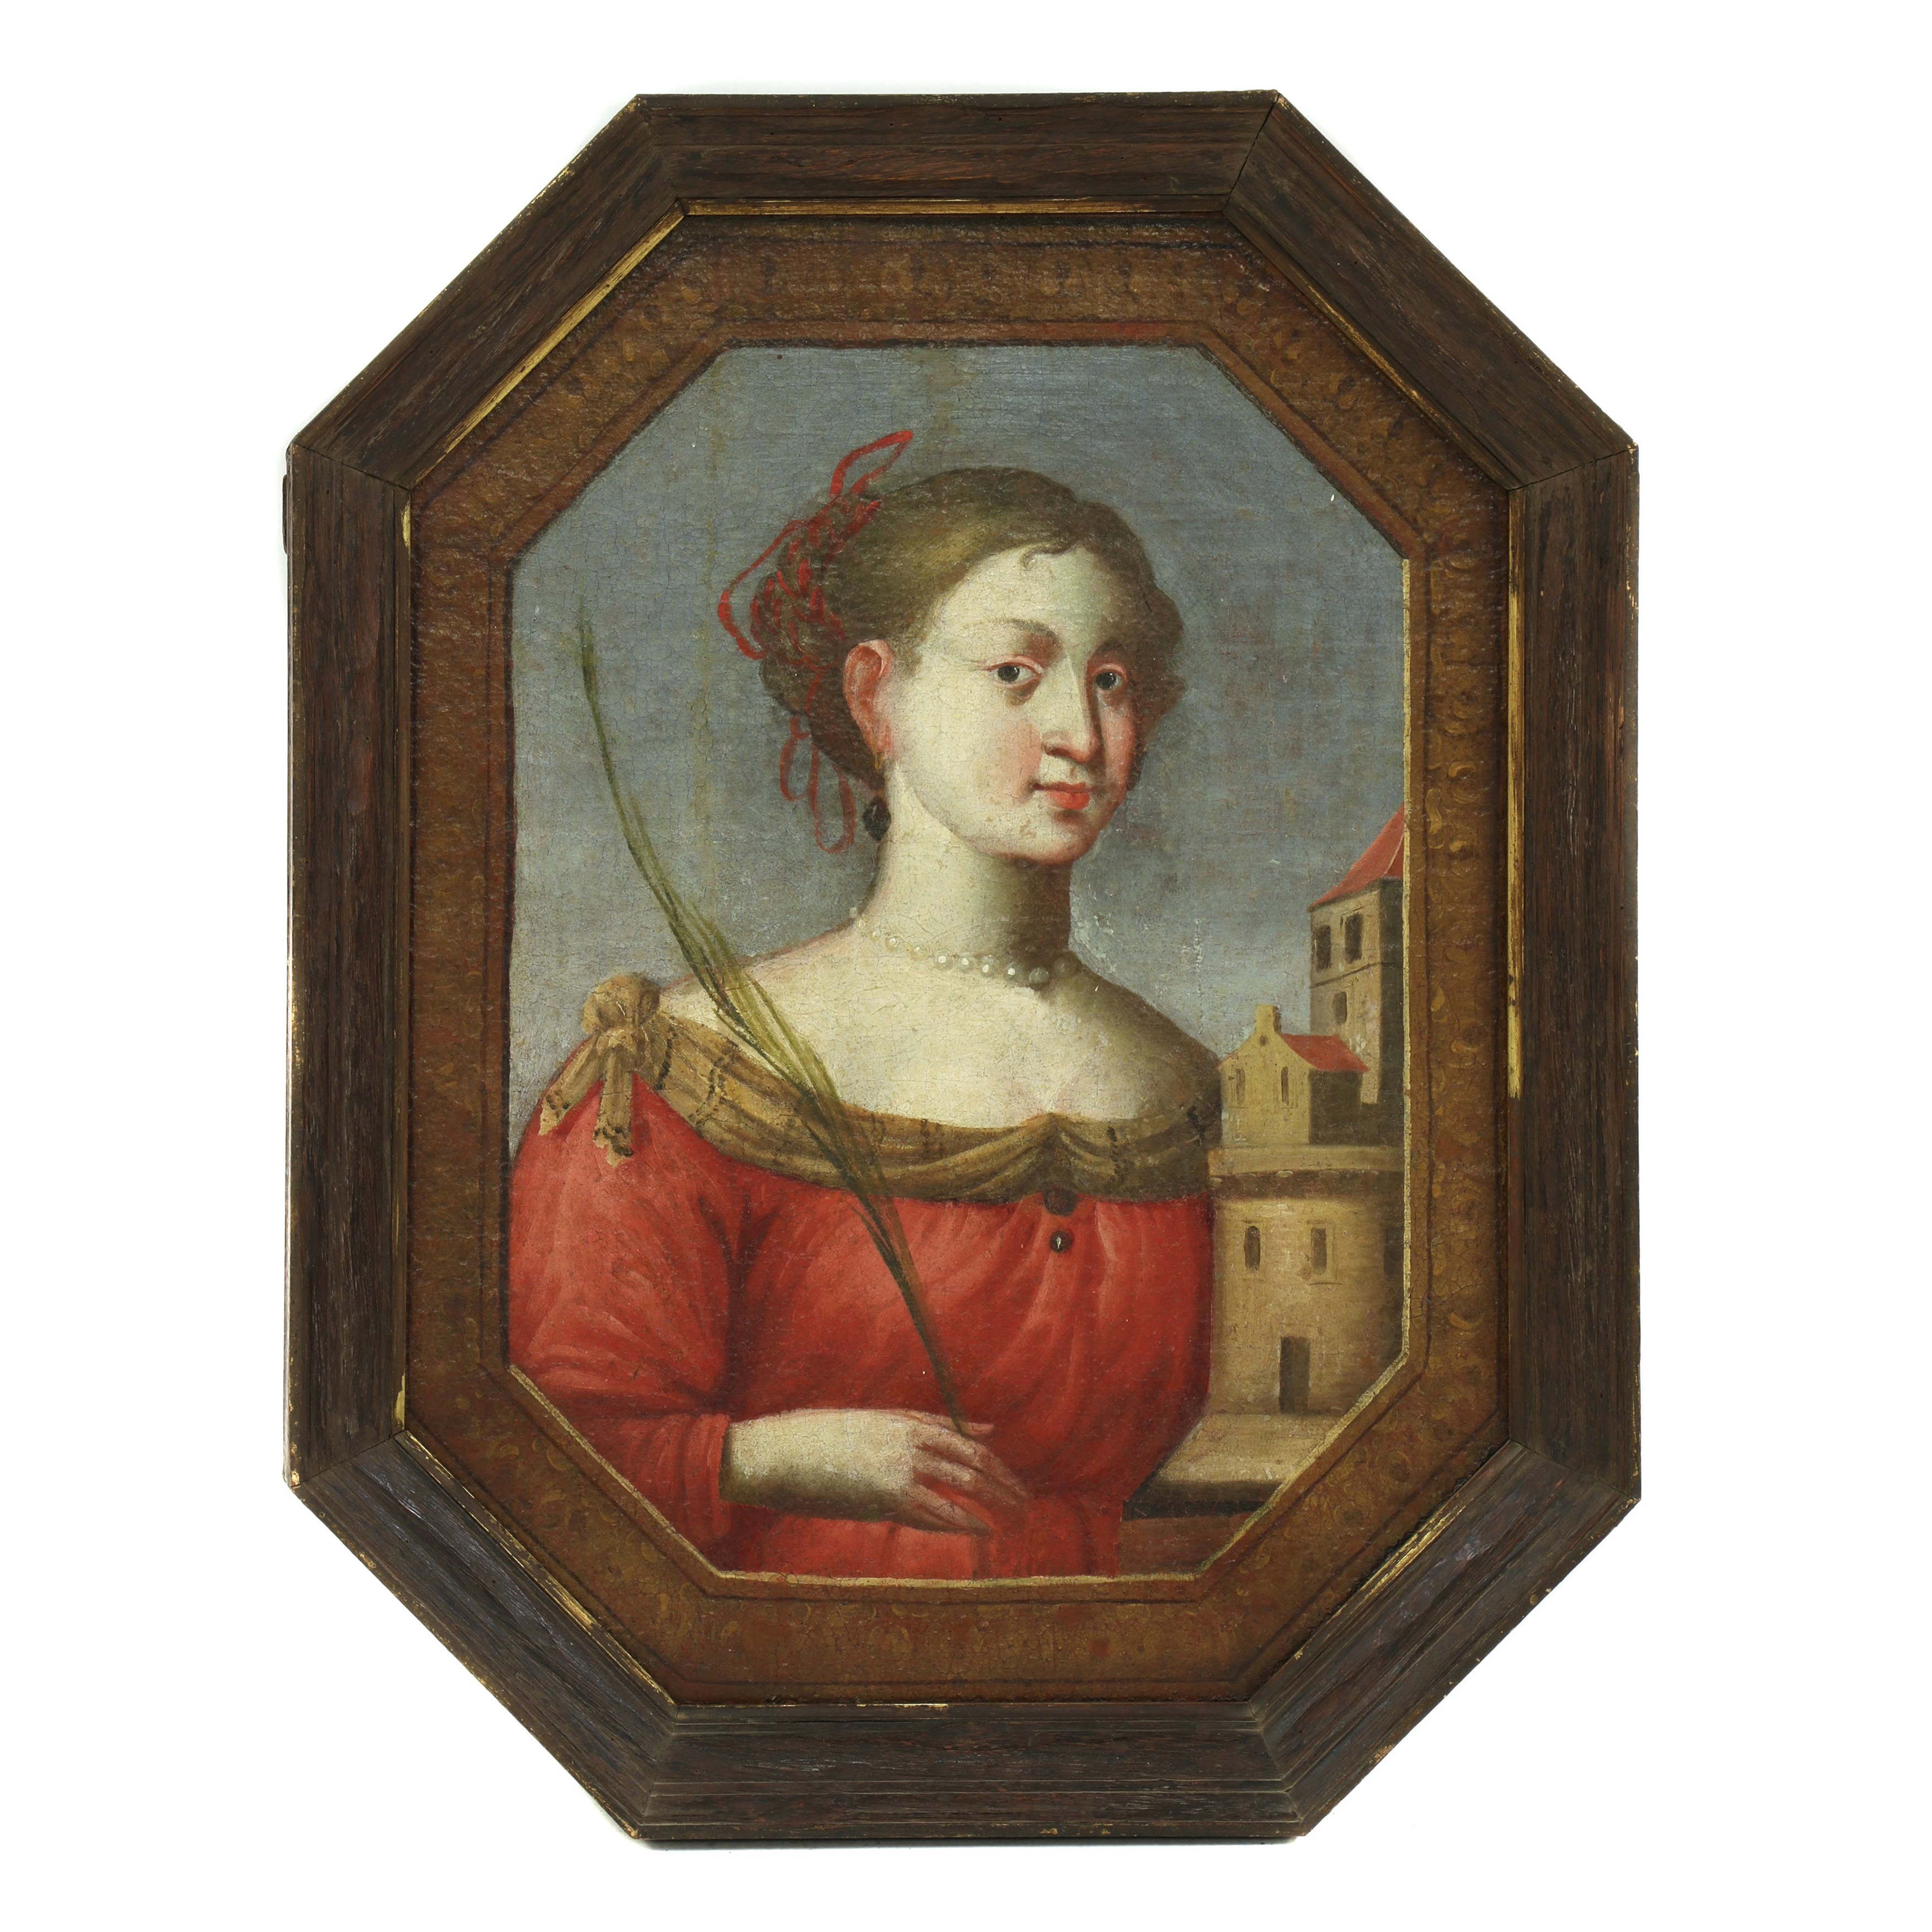 North Italian School, early 17th century, St Barbara holding a palm frond, the tower beyond